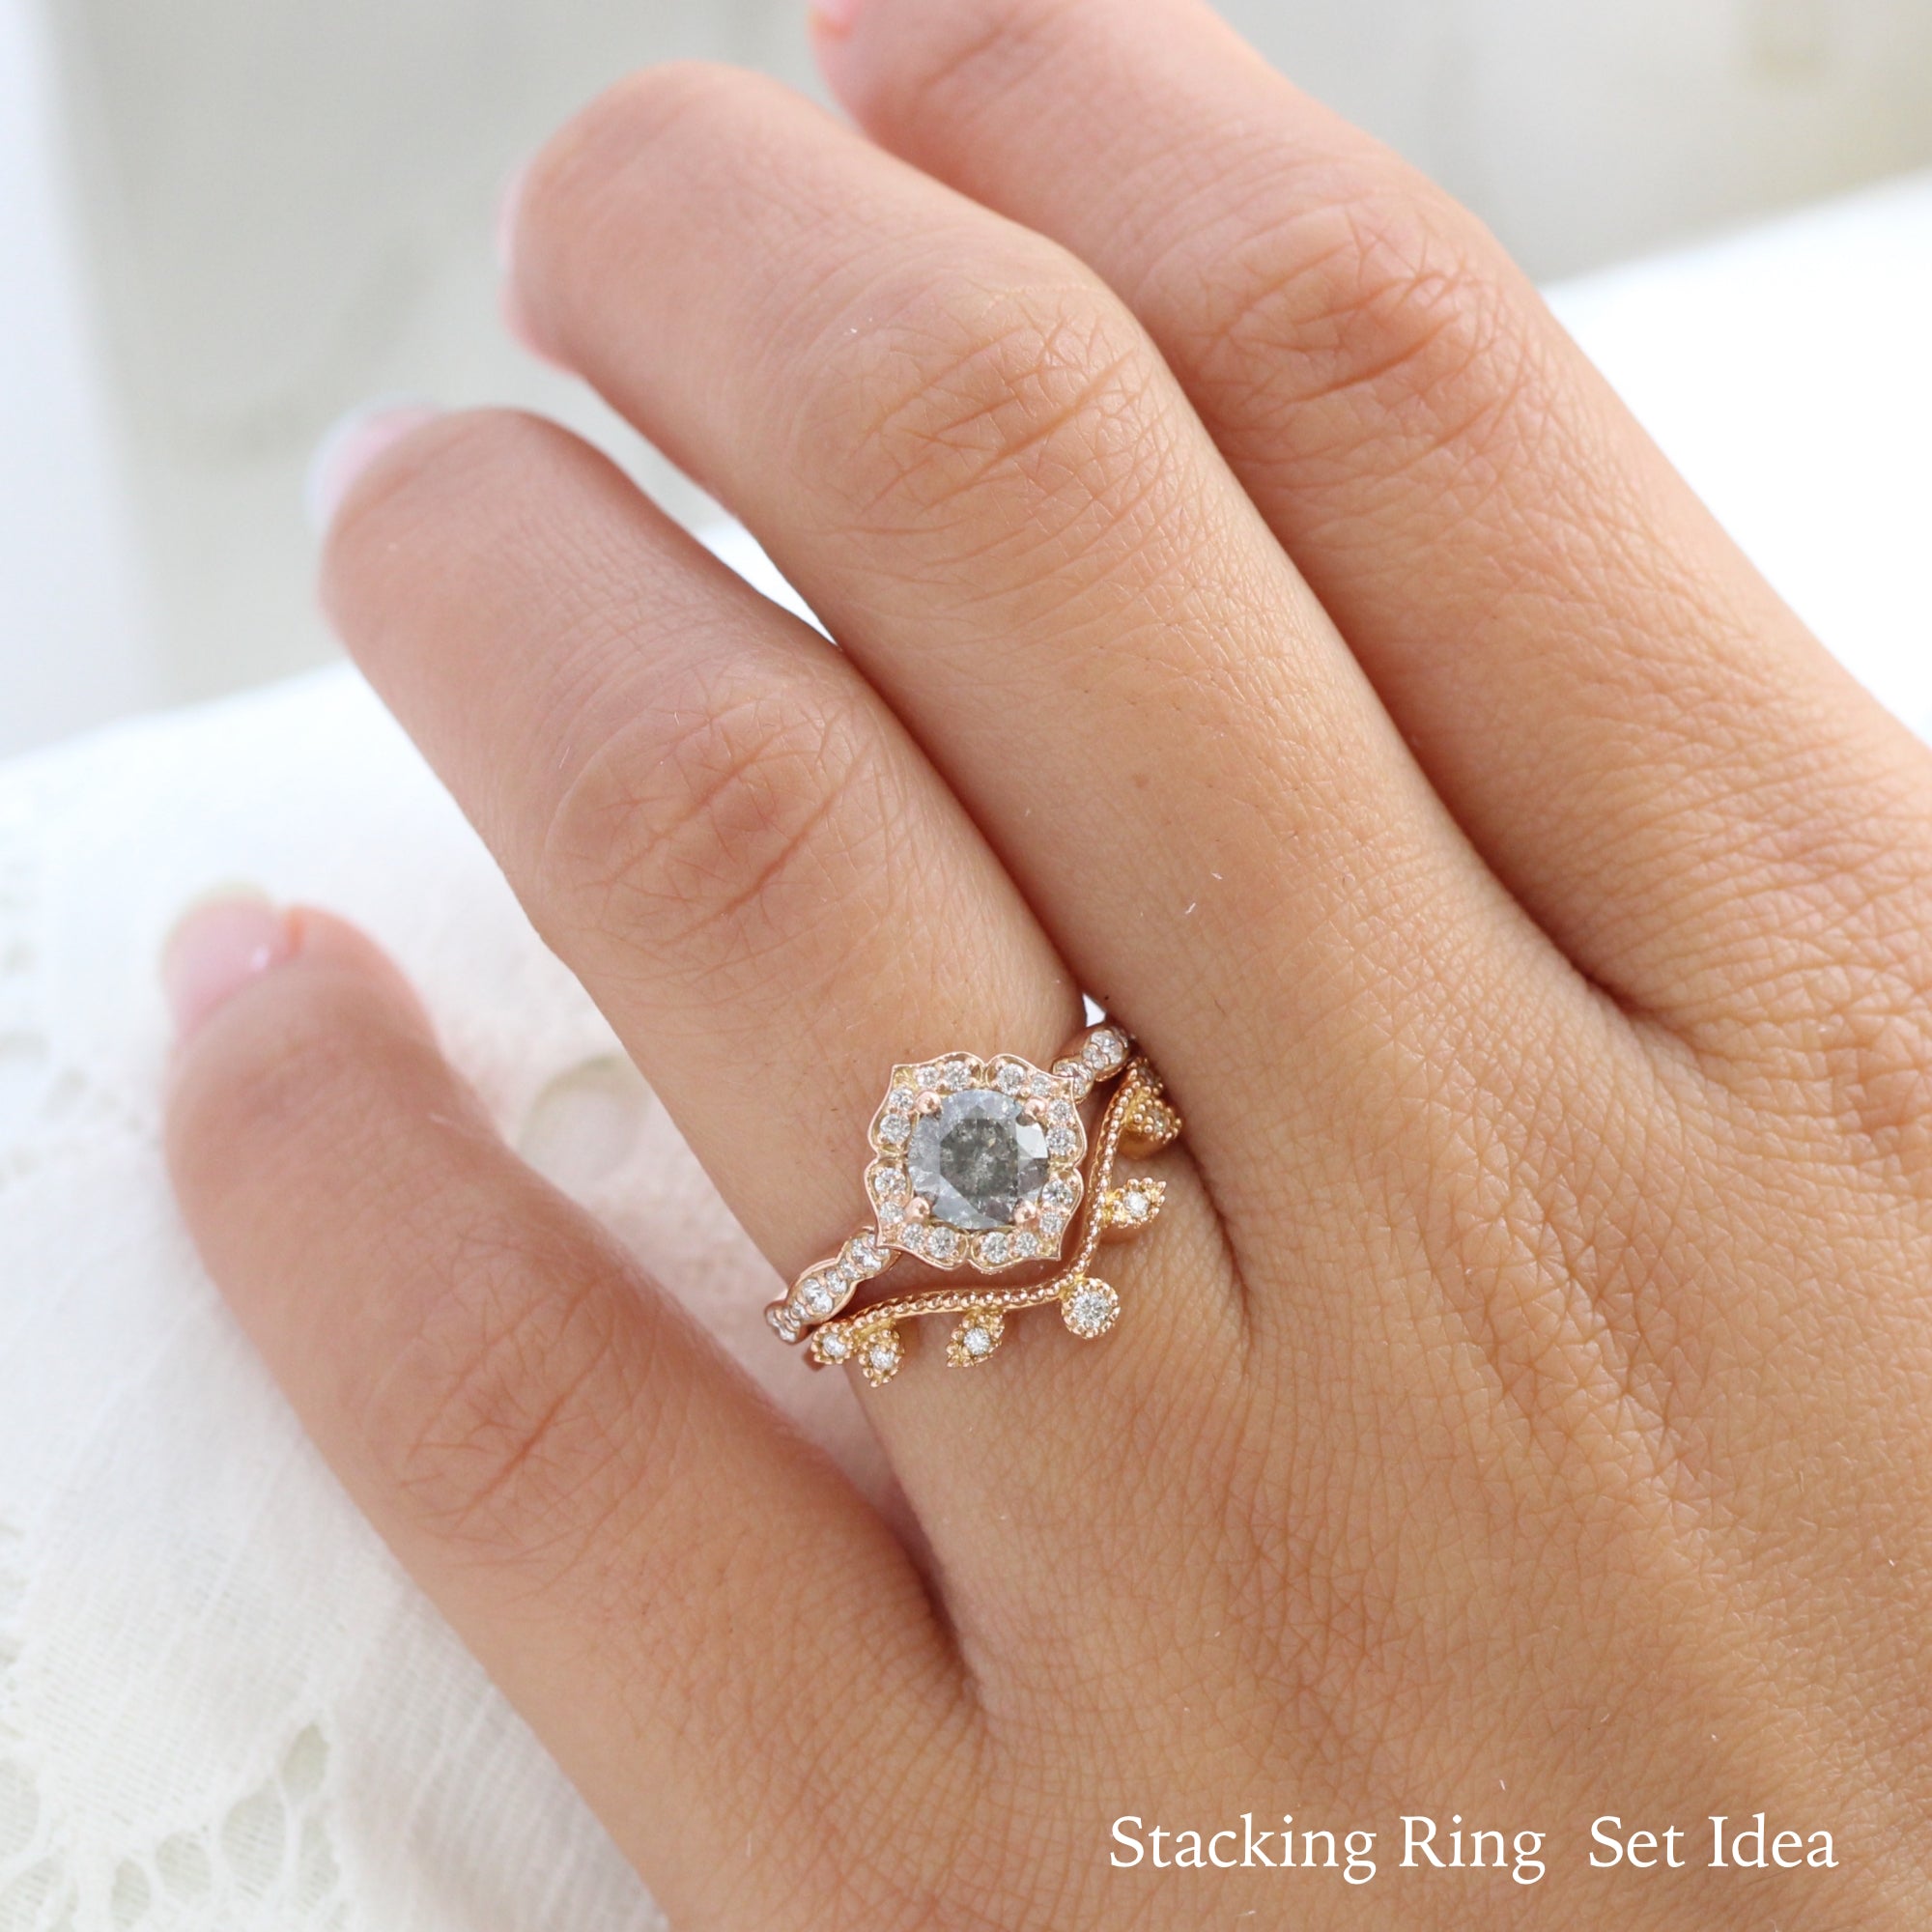 Custom Made Floral Engagement Rings | Abby Sparks Jewelry